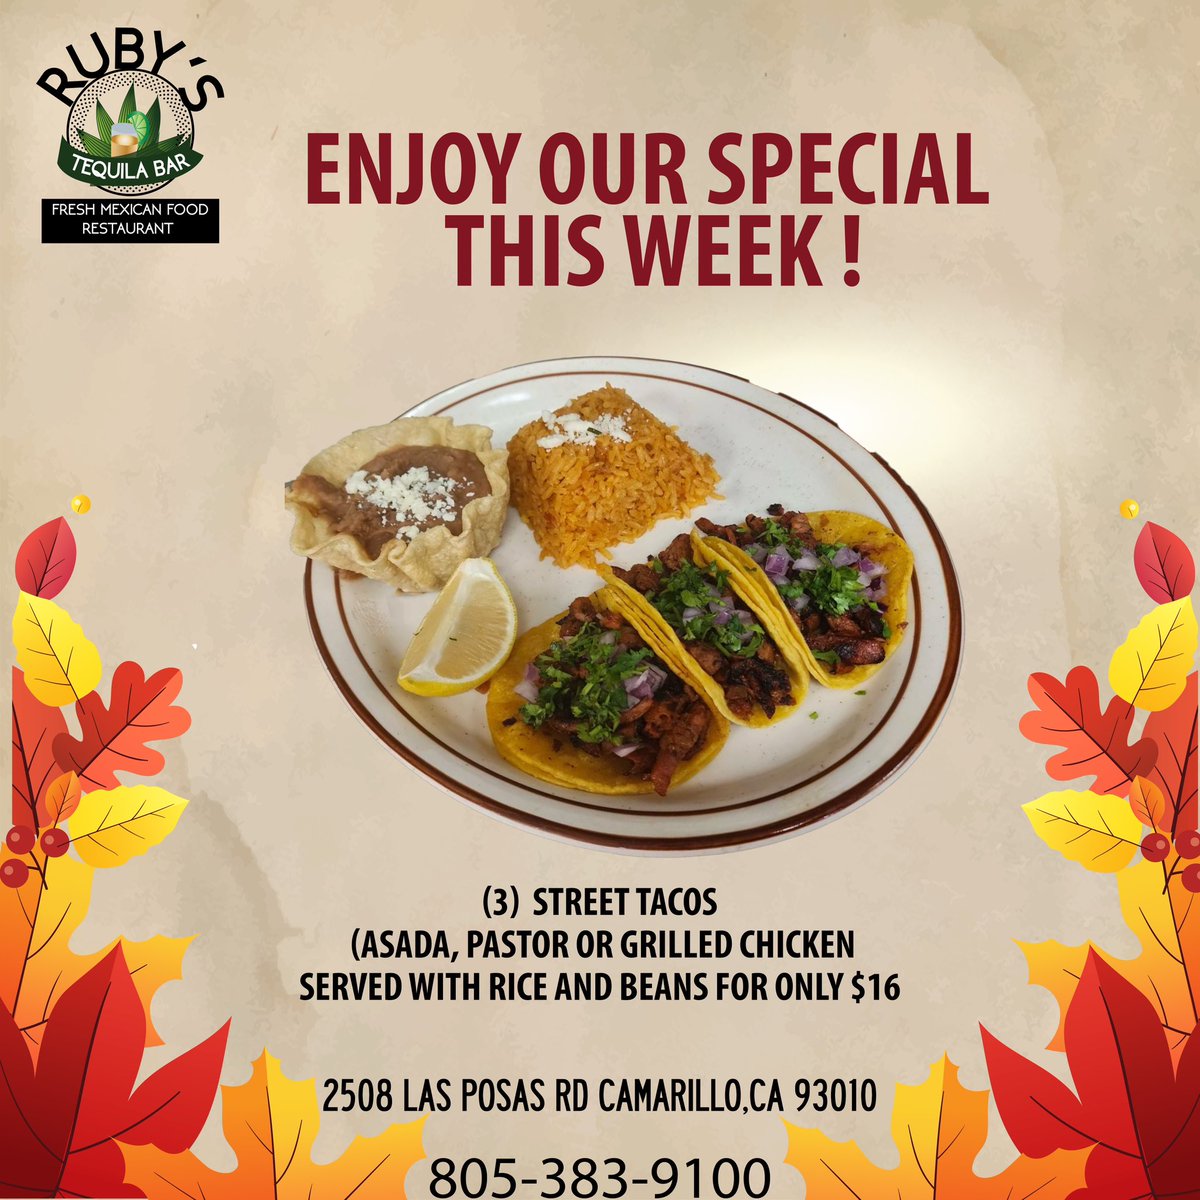 Enjoy our special this week!
#rubysfreshmexicanfoodandtequilabar 
#tacos #mexicanrestaurant